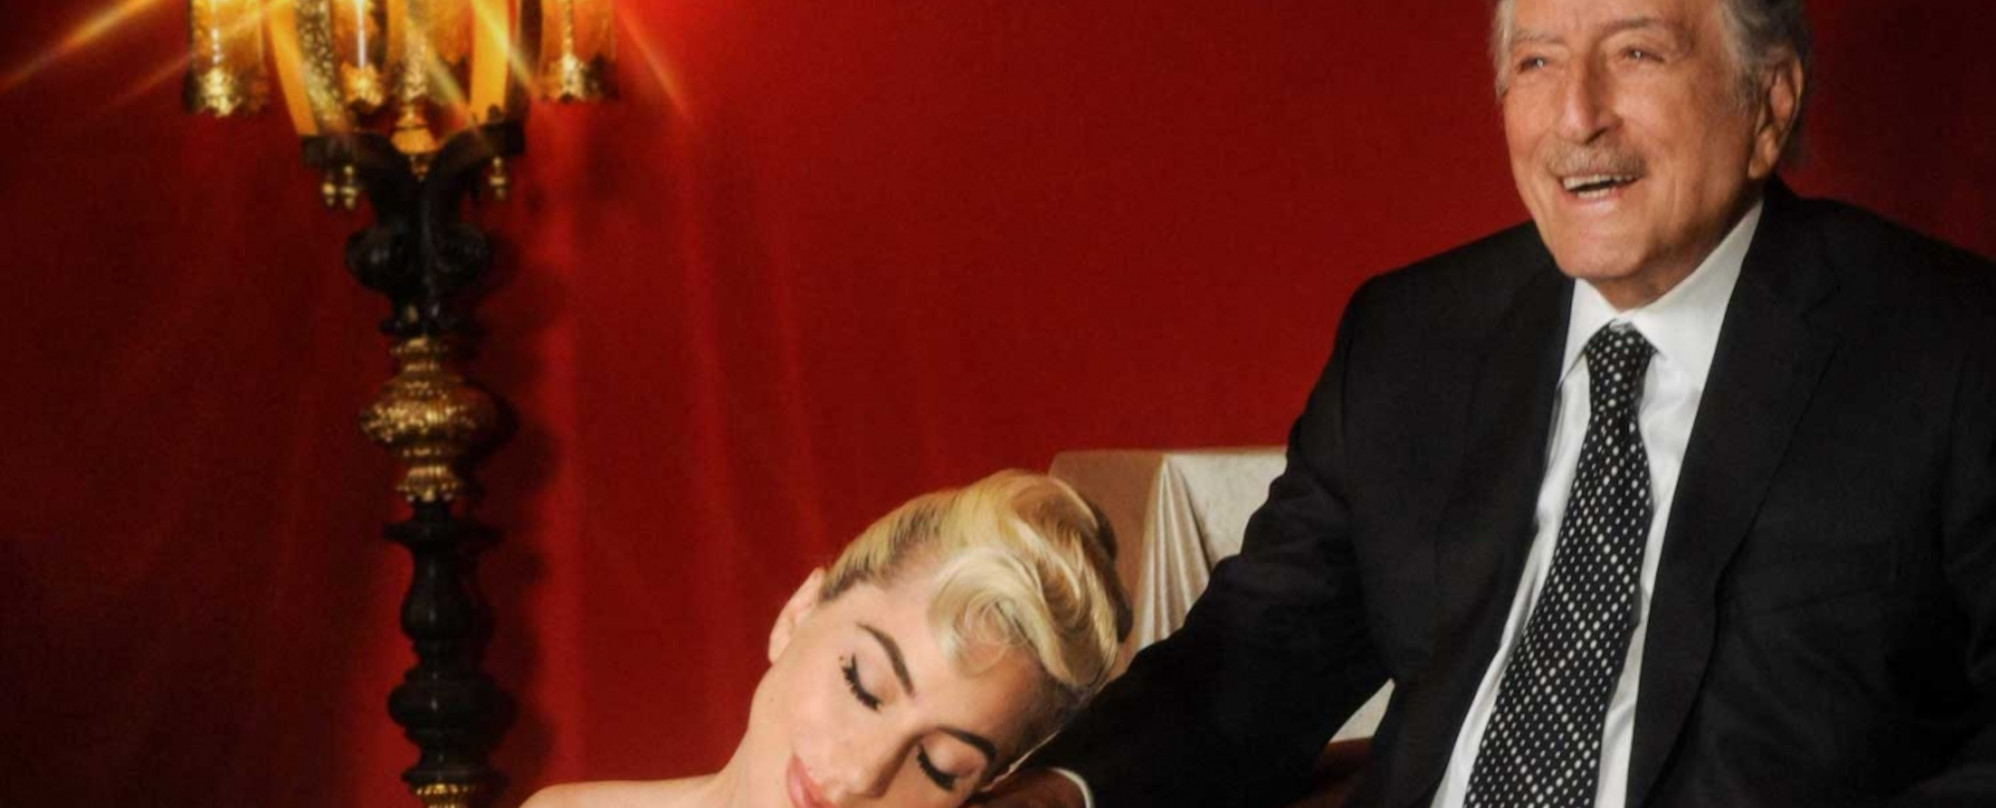 Lady Gaga and Tony Bennett Release New Album, ‘Love For Sale’